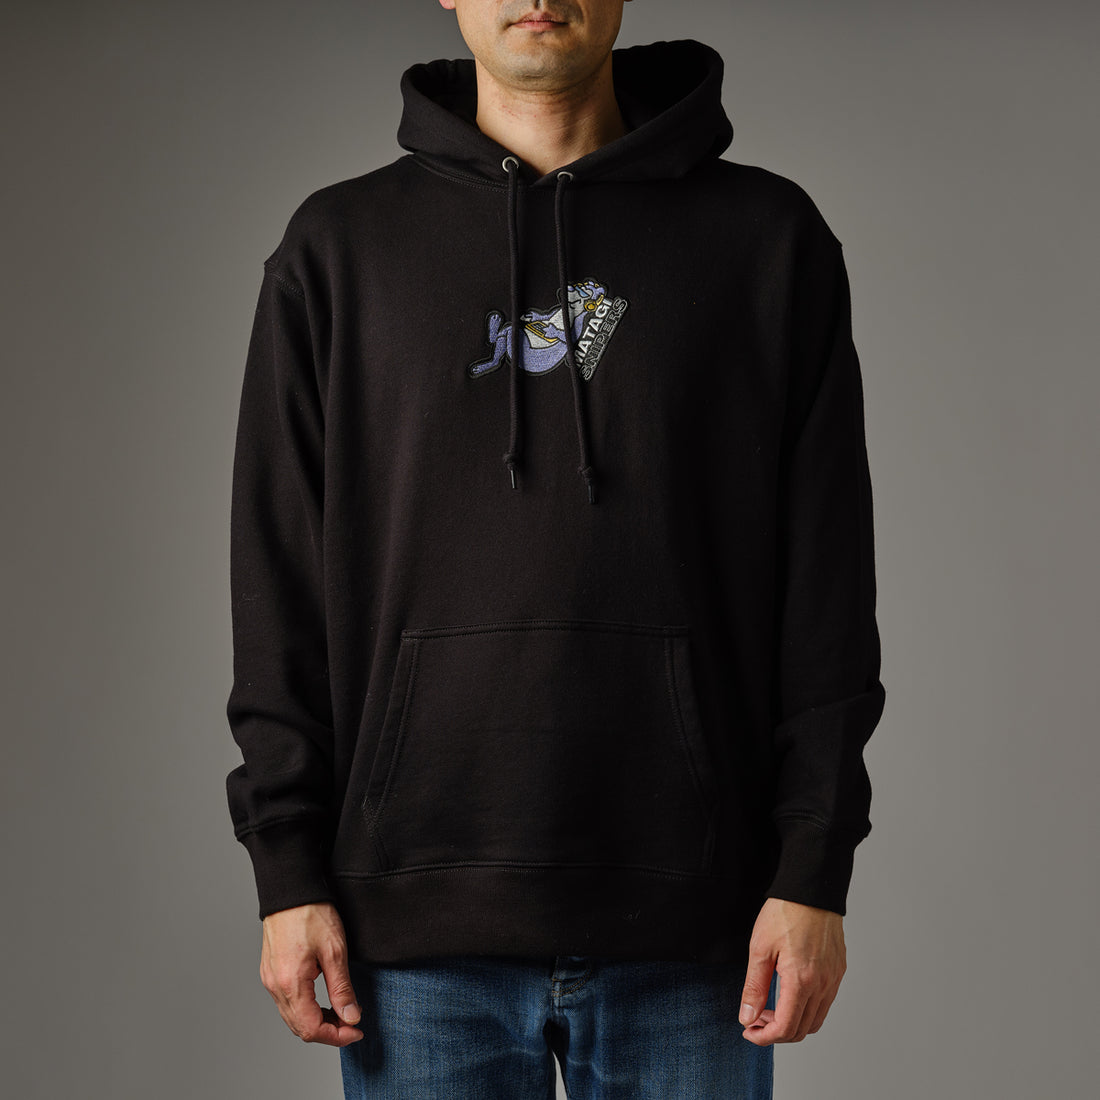 "THE BEAR playing games" Hoodie